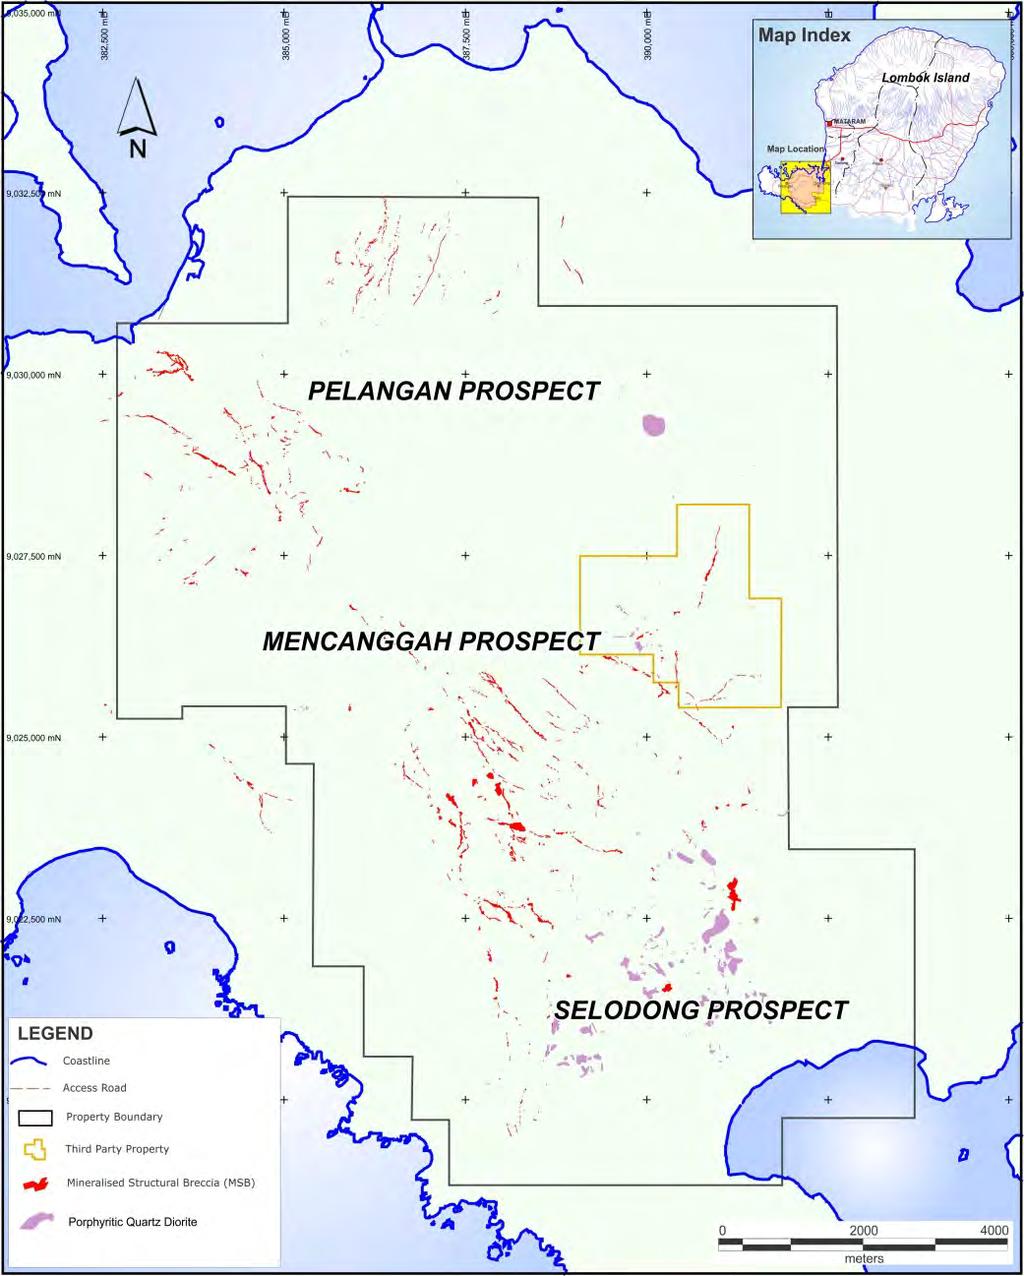 Exploration Activity in 2012 Continued to extend and explore gold epithermal mineralization Exploration drilling on Pelangan mineralized structural breccia (MSB) structures in NW corner of property